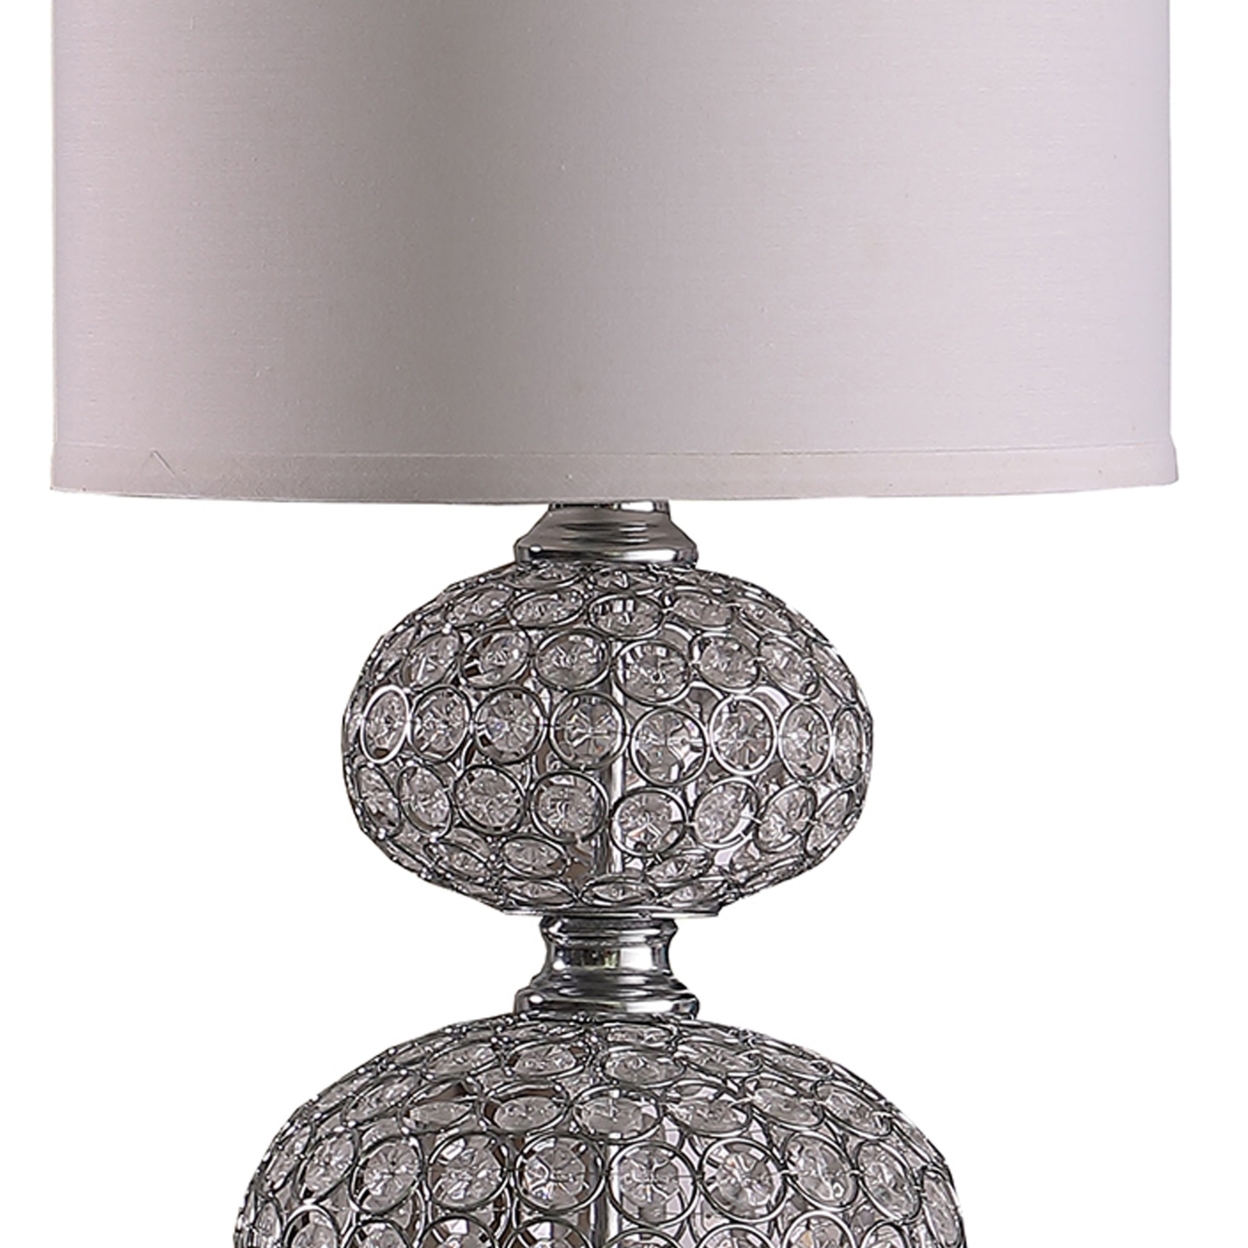 Stacked Ball Design Metal Table Lamp With Crystal Accents, Silver- Saltoro Sherpi